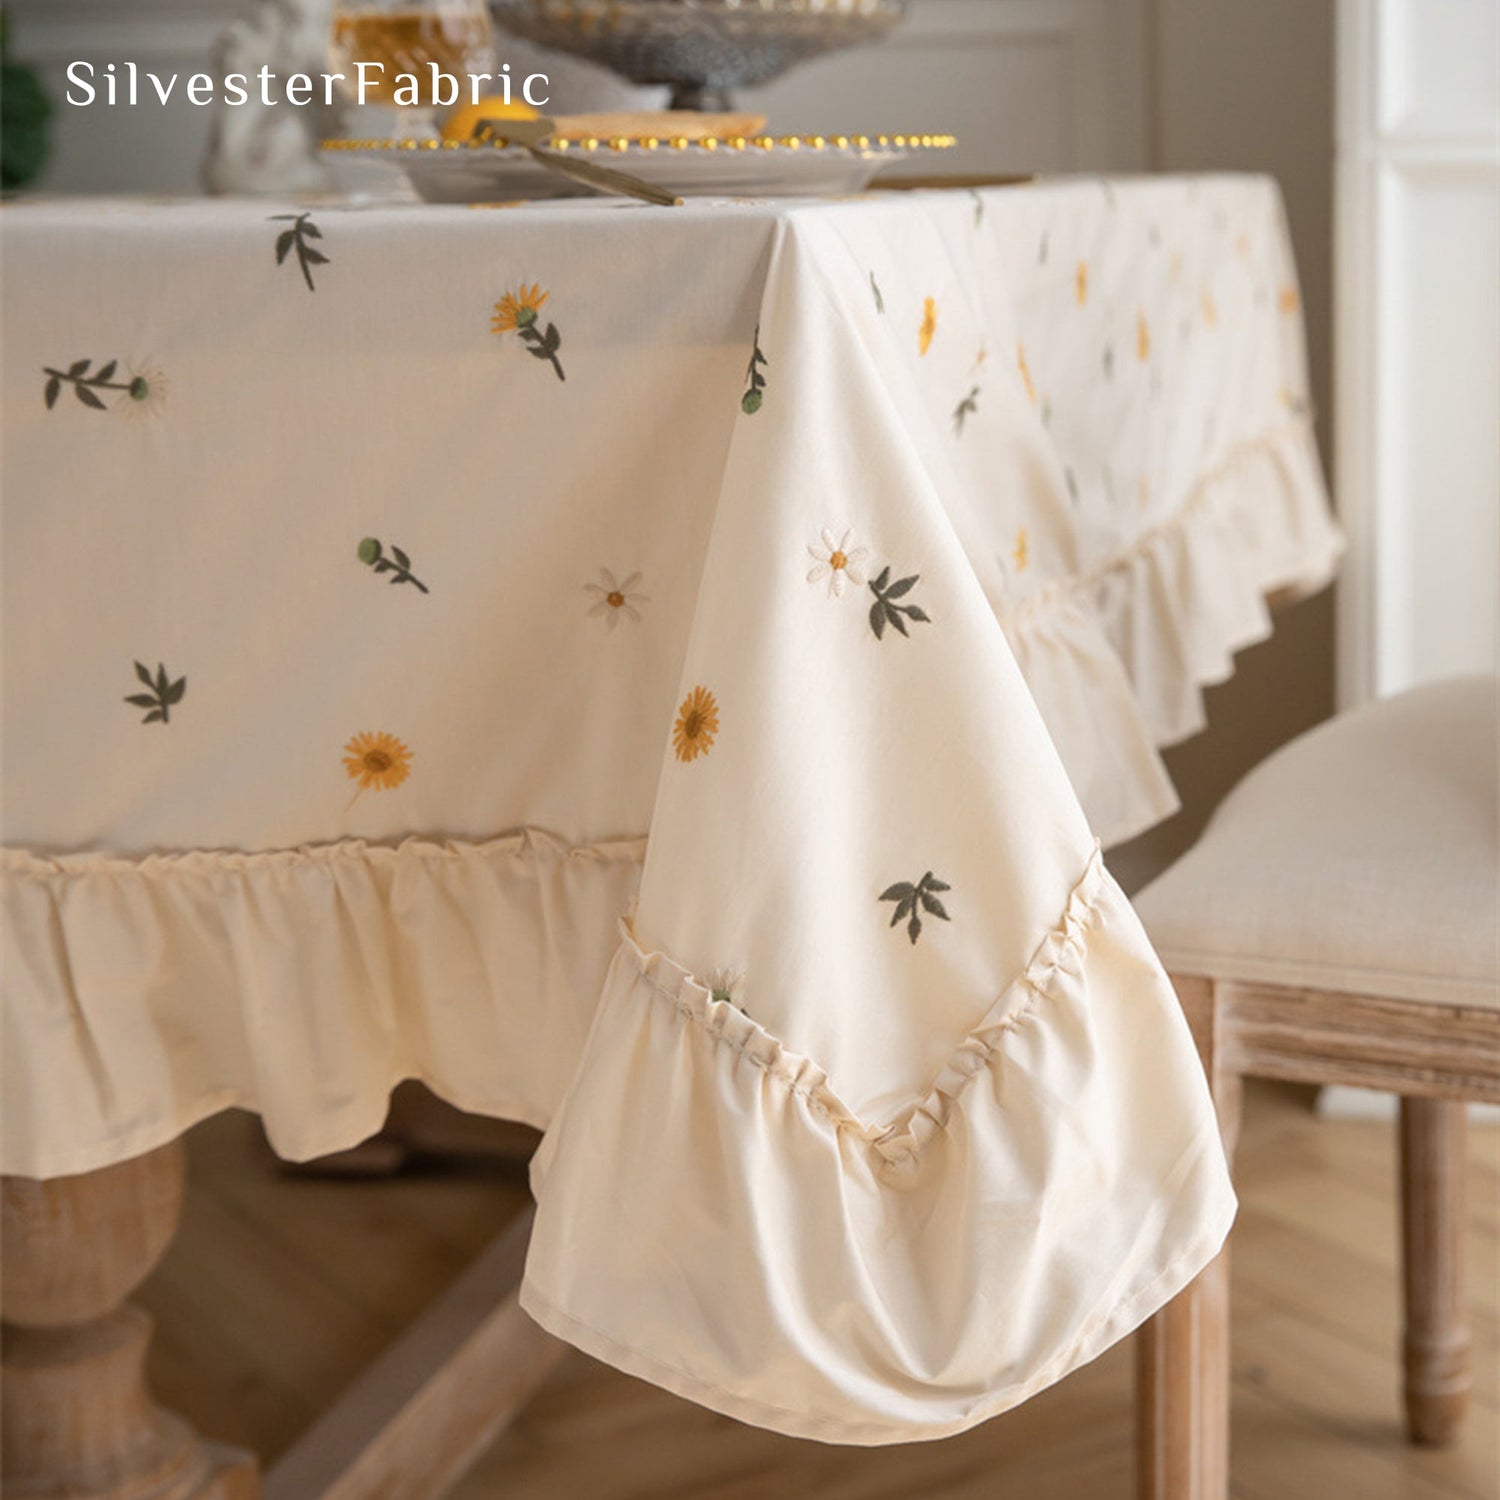 Embroidered Tablecloth丨Free Shipping - SilvesterFabric